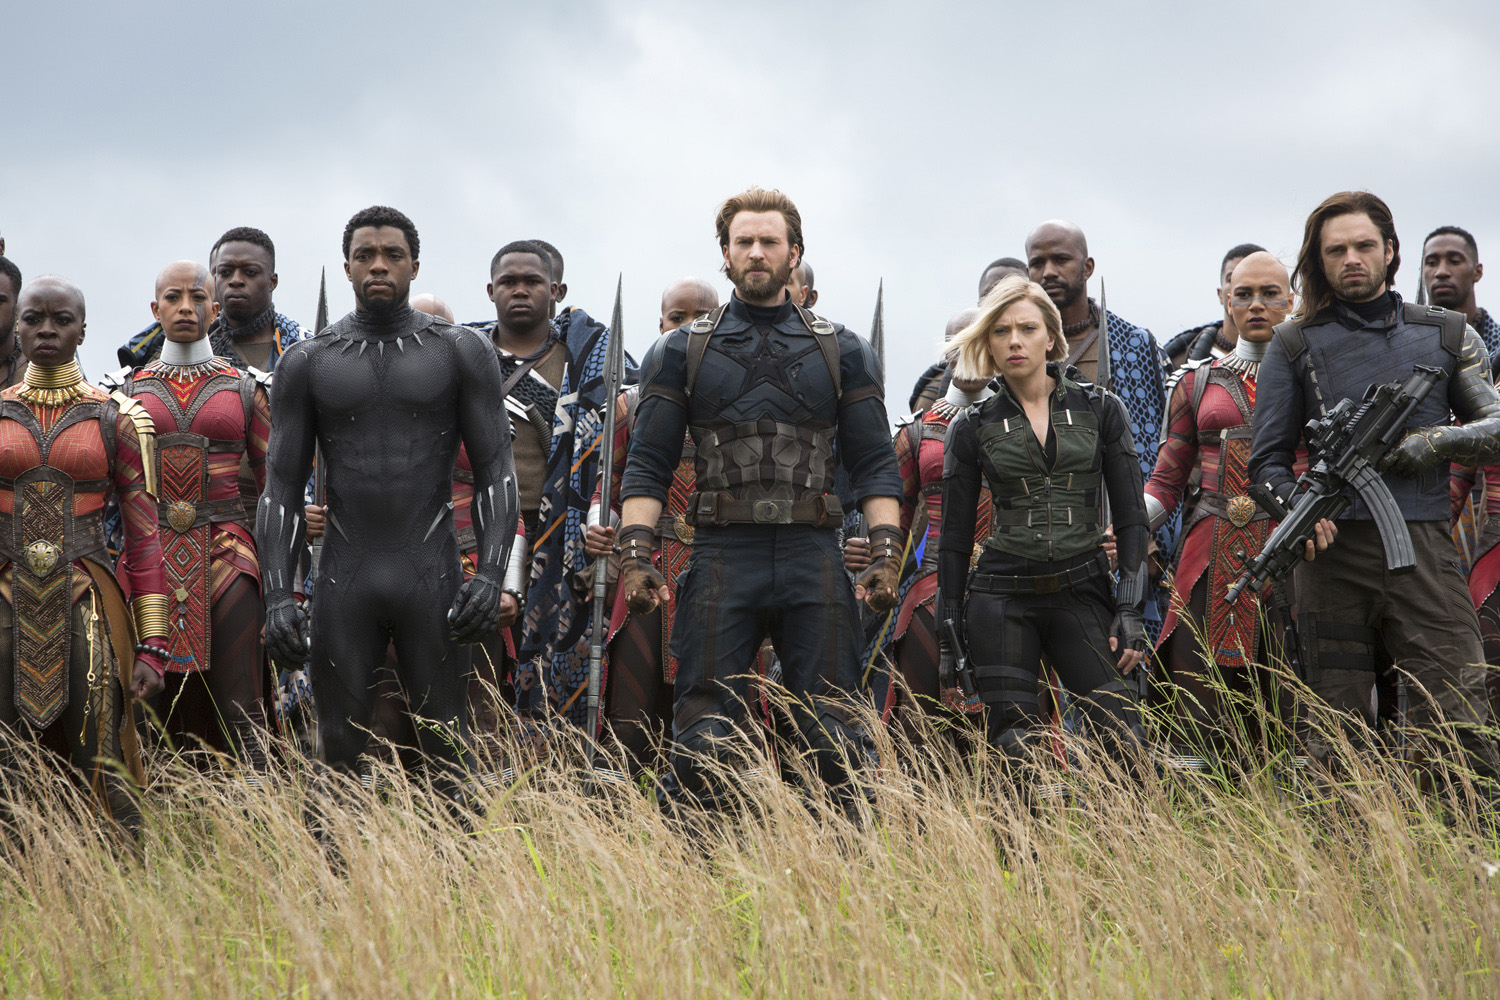 CULMINATION. 'Avengers: Infinity War' is only one half of a film if one sees it as the titular superheroes’ narrative. Photo by Chuck Zlotnick/Marvel Studios 2018 